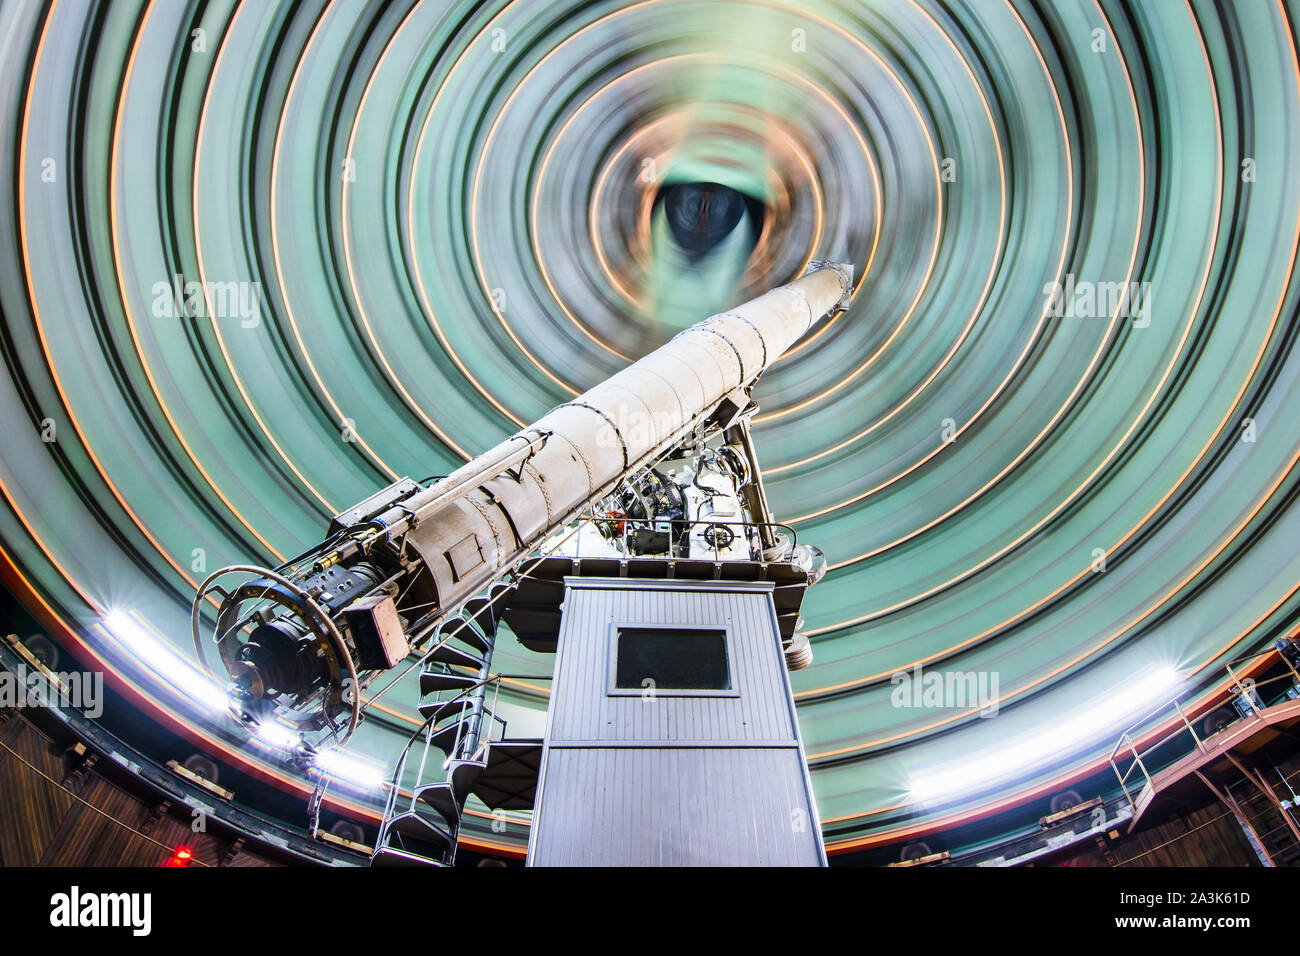 Sep 28, 2019 San Jose / CA / USA - The historical 36-inch telescope at Lick Observatory; long exposure, moving dome in the background; Mount Hamilton; Stock Photo